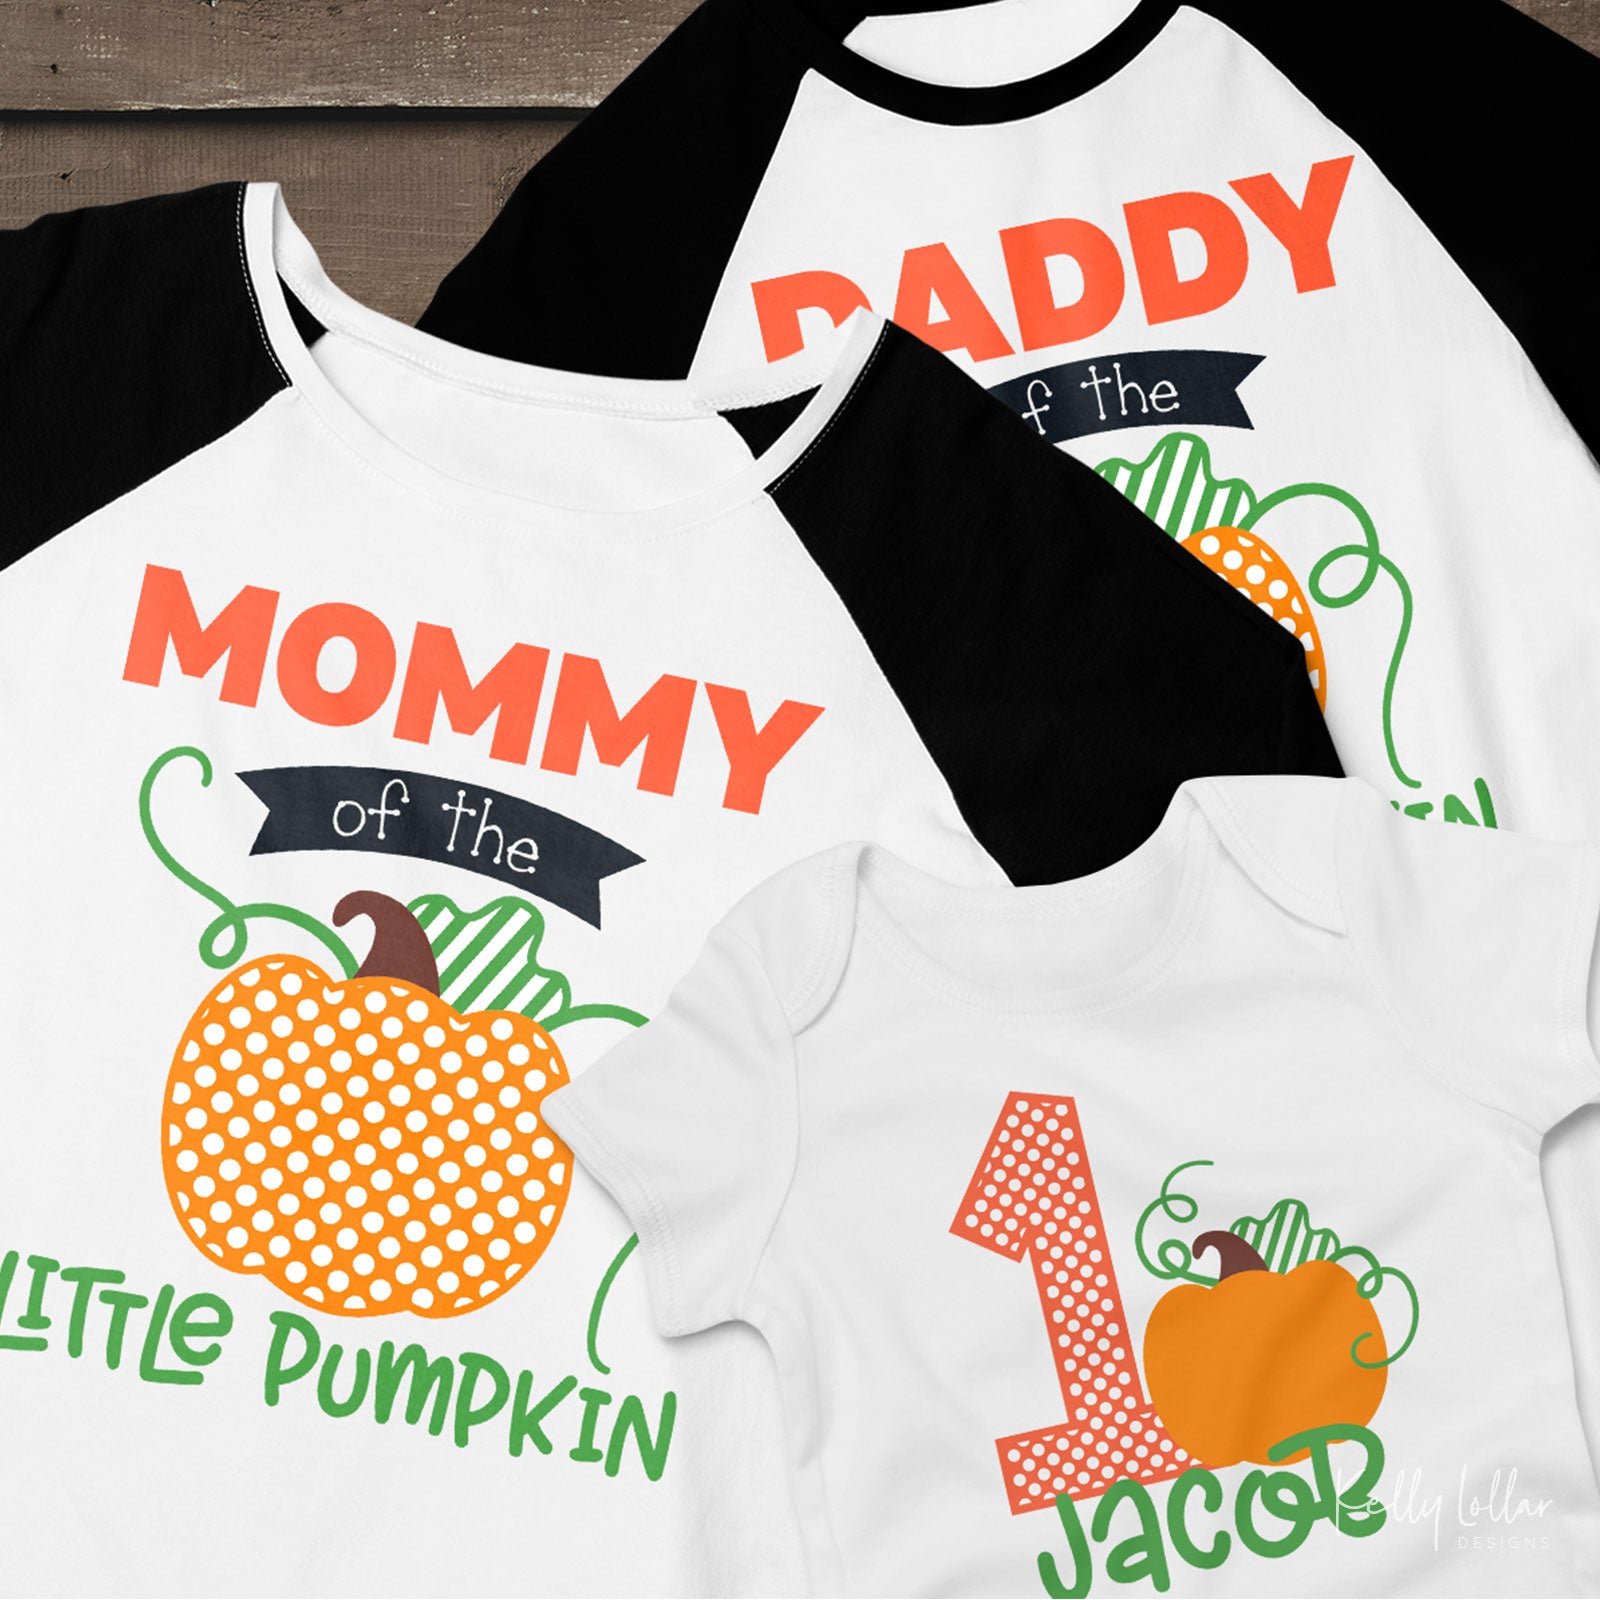 Little Pumpkin Birthday Set | Baby & Toddler Fall Birthday Sets with Matching Mommy and Daddy Shirt Designs  | SVG DXF PNG Cut Files